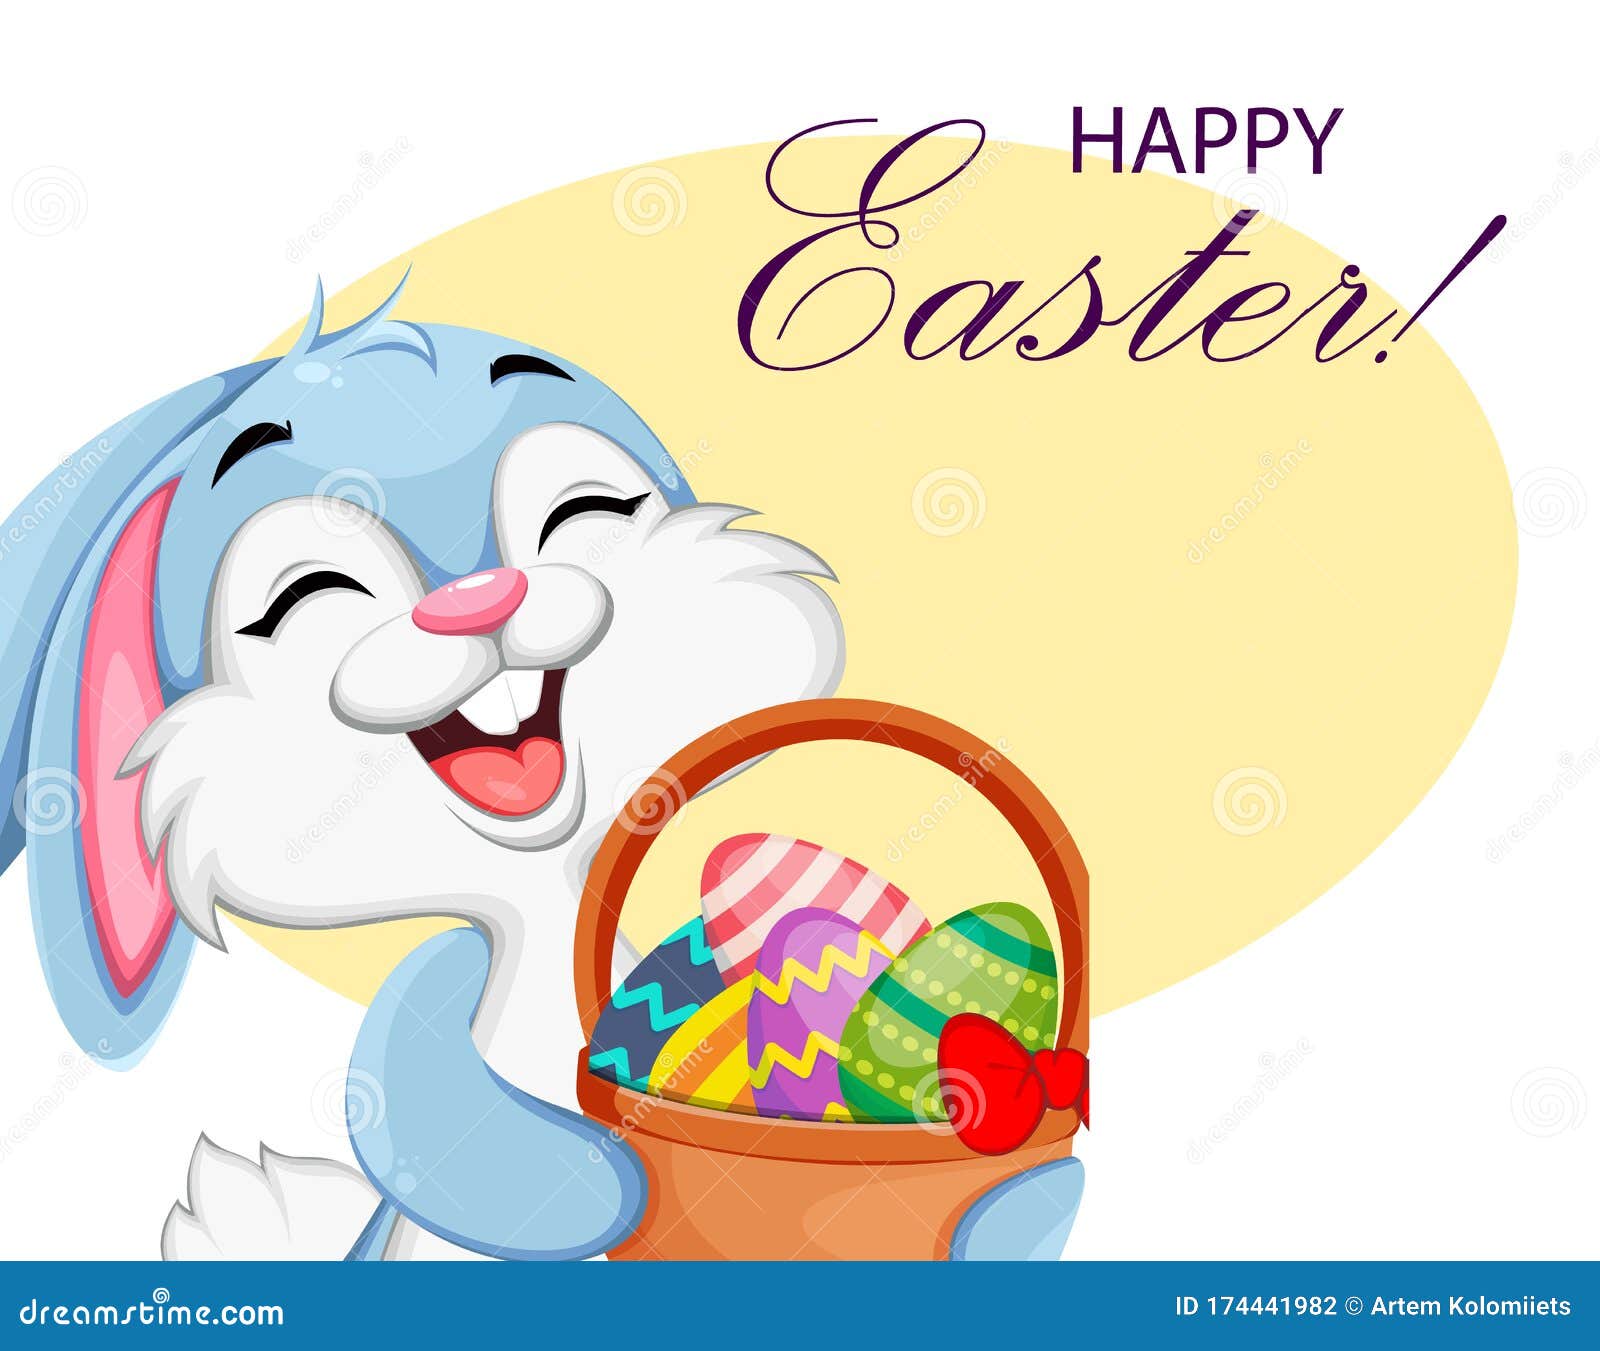 Funny Easter Bunny Cartoon Character Stock Vector - Illustration of card,  ears: 174441982